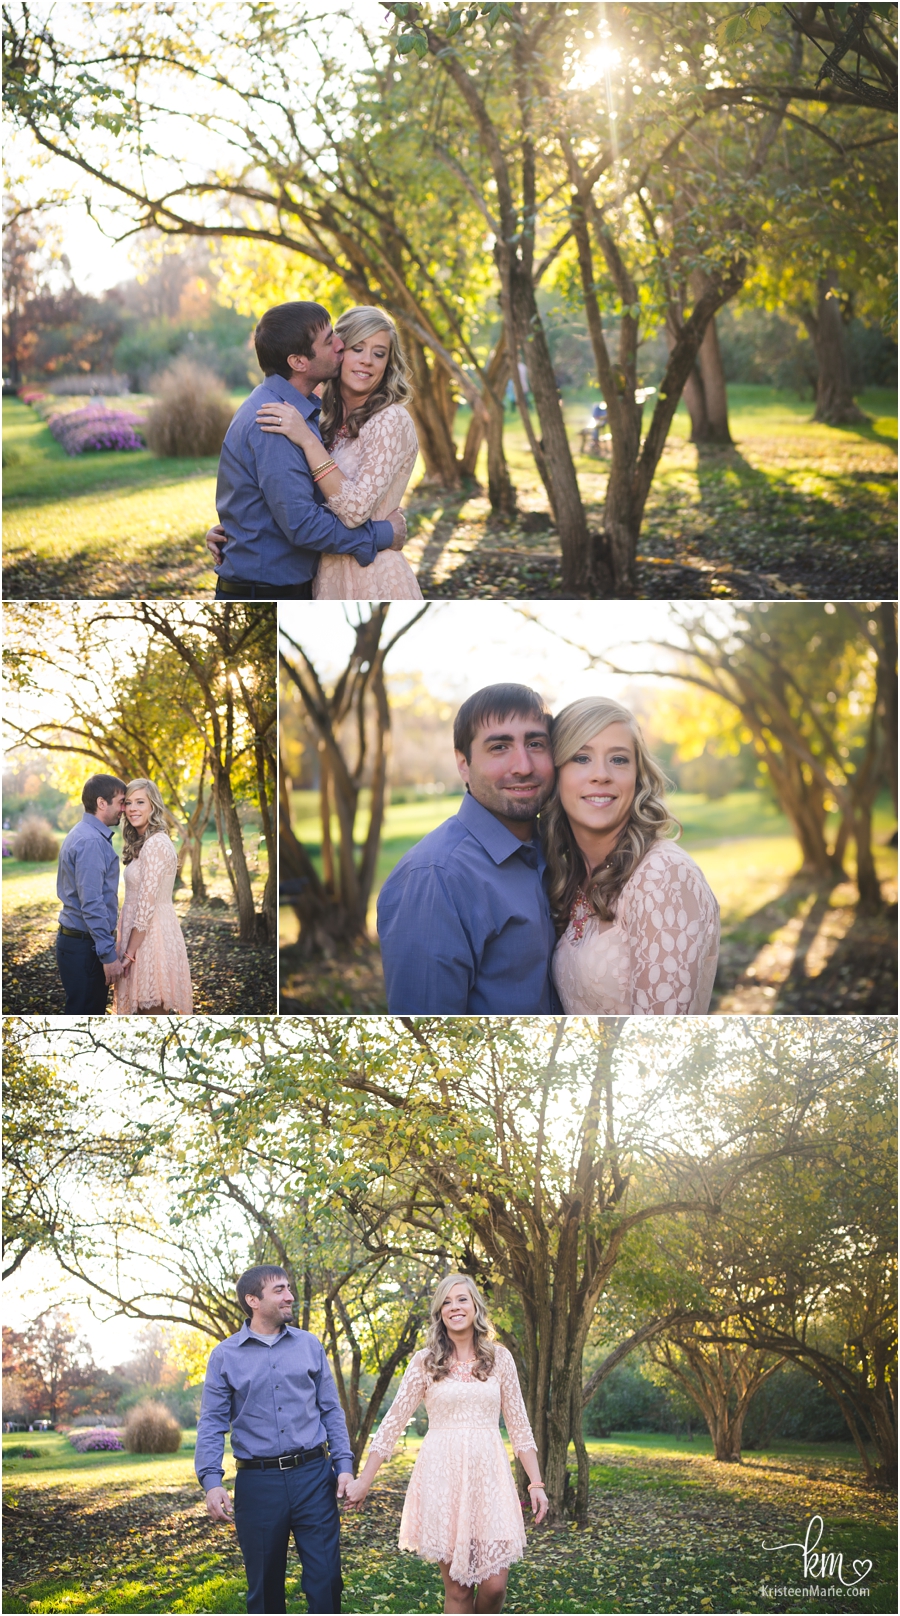 blue and pink - engagement phtoography outdoors